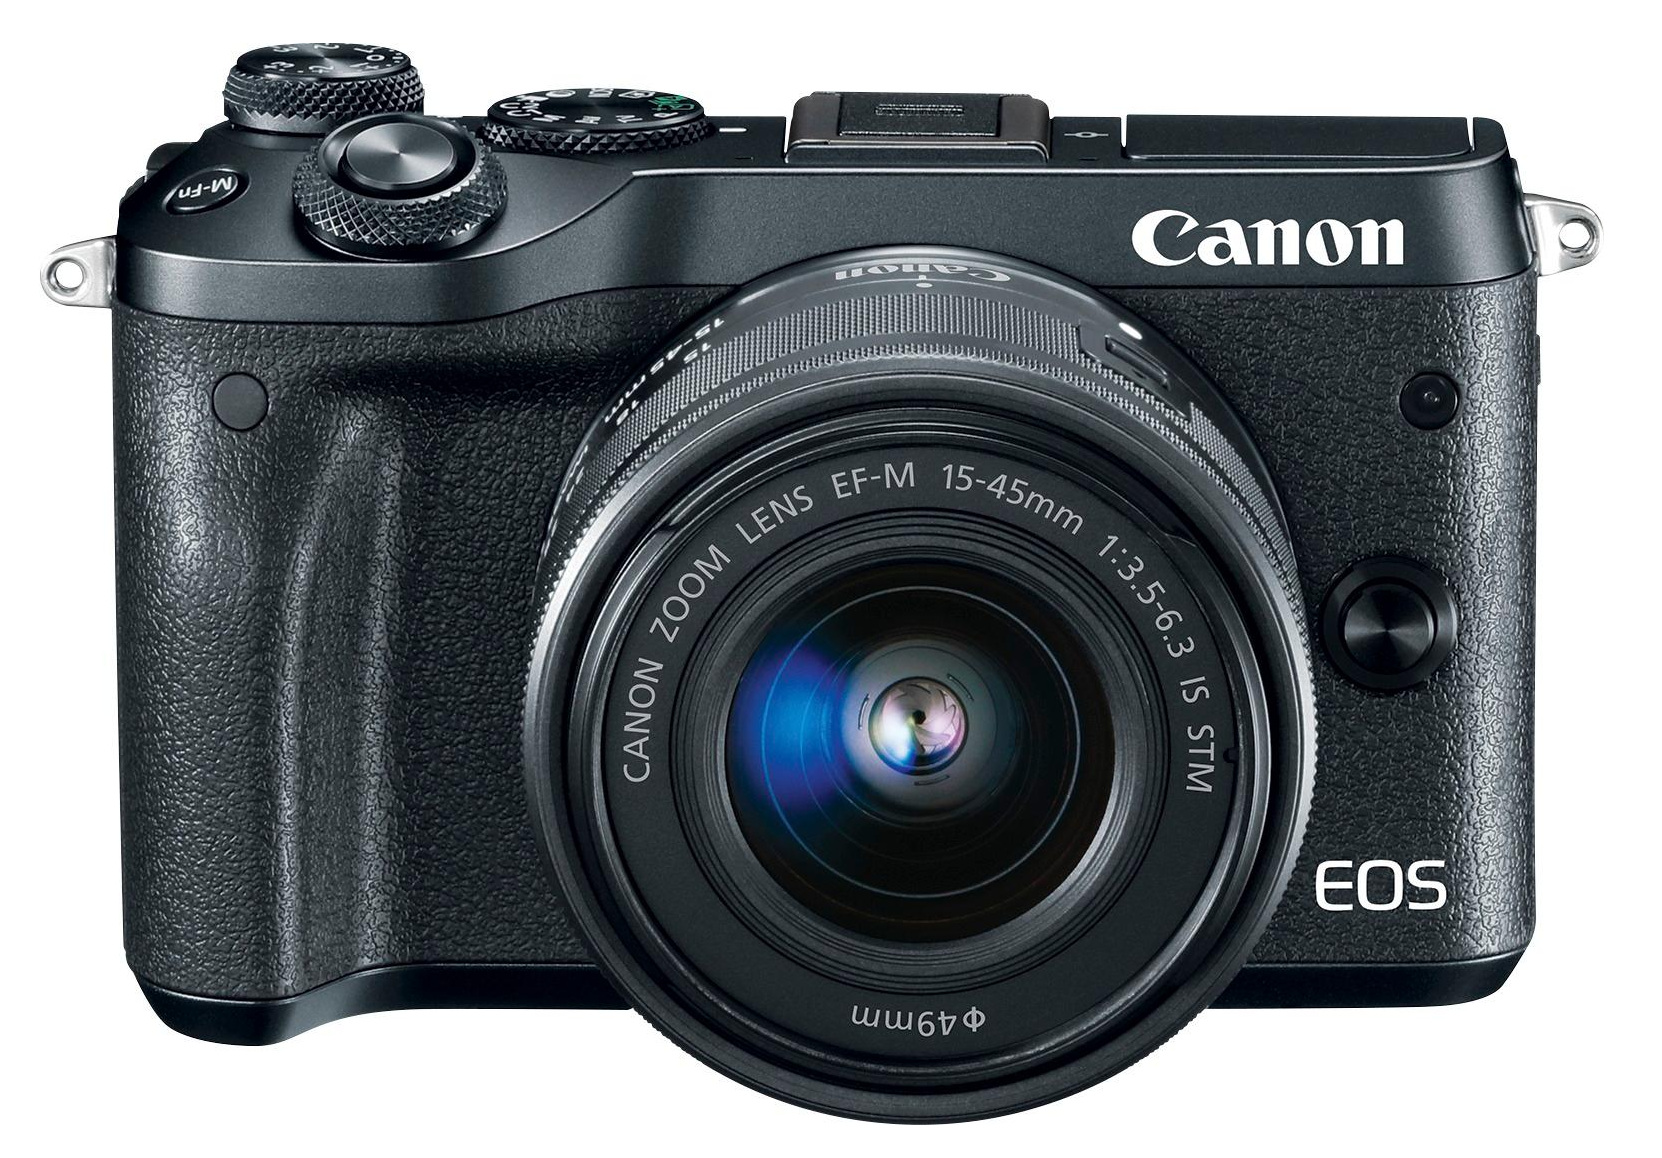 Canon Eos M50 Dual Lens Kt 24 1mp With Ef M 15 45mm And 55 0mm Zoom Lenses Full Compass Systems